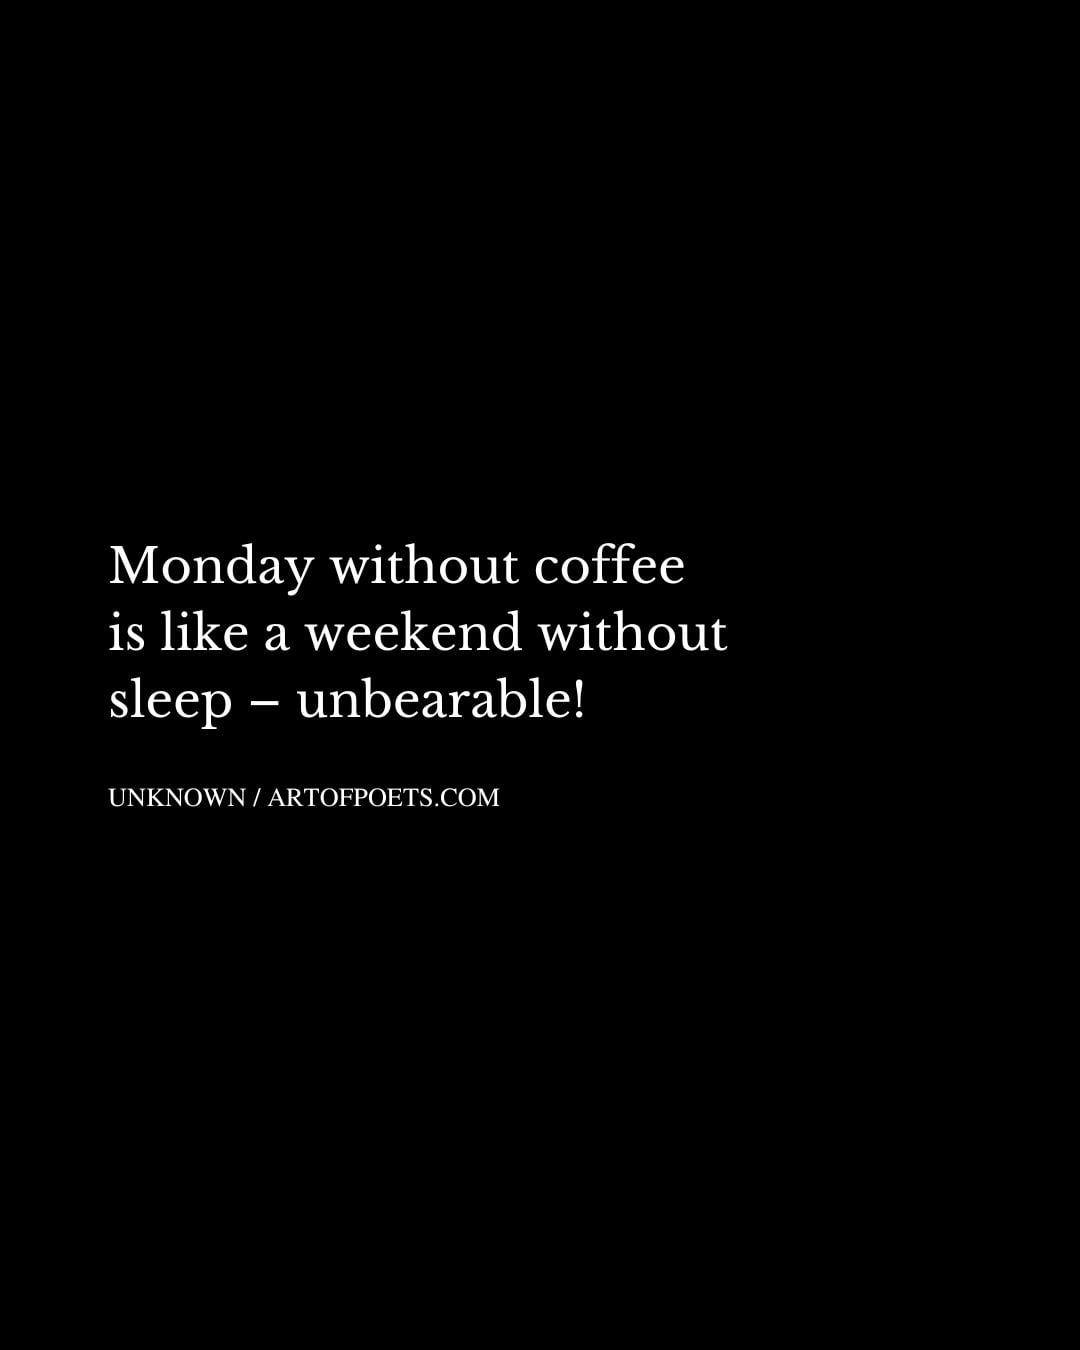 Monday without coffee is like a weekend without sleep – unbearable